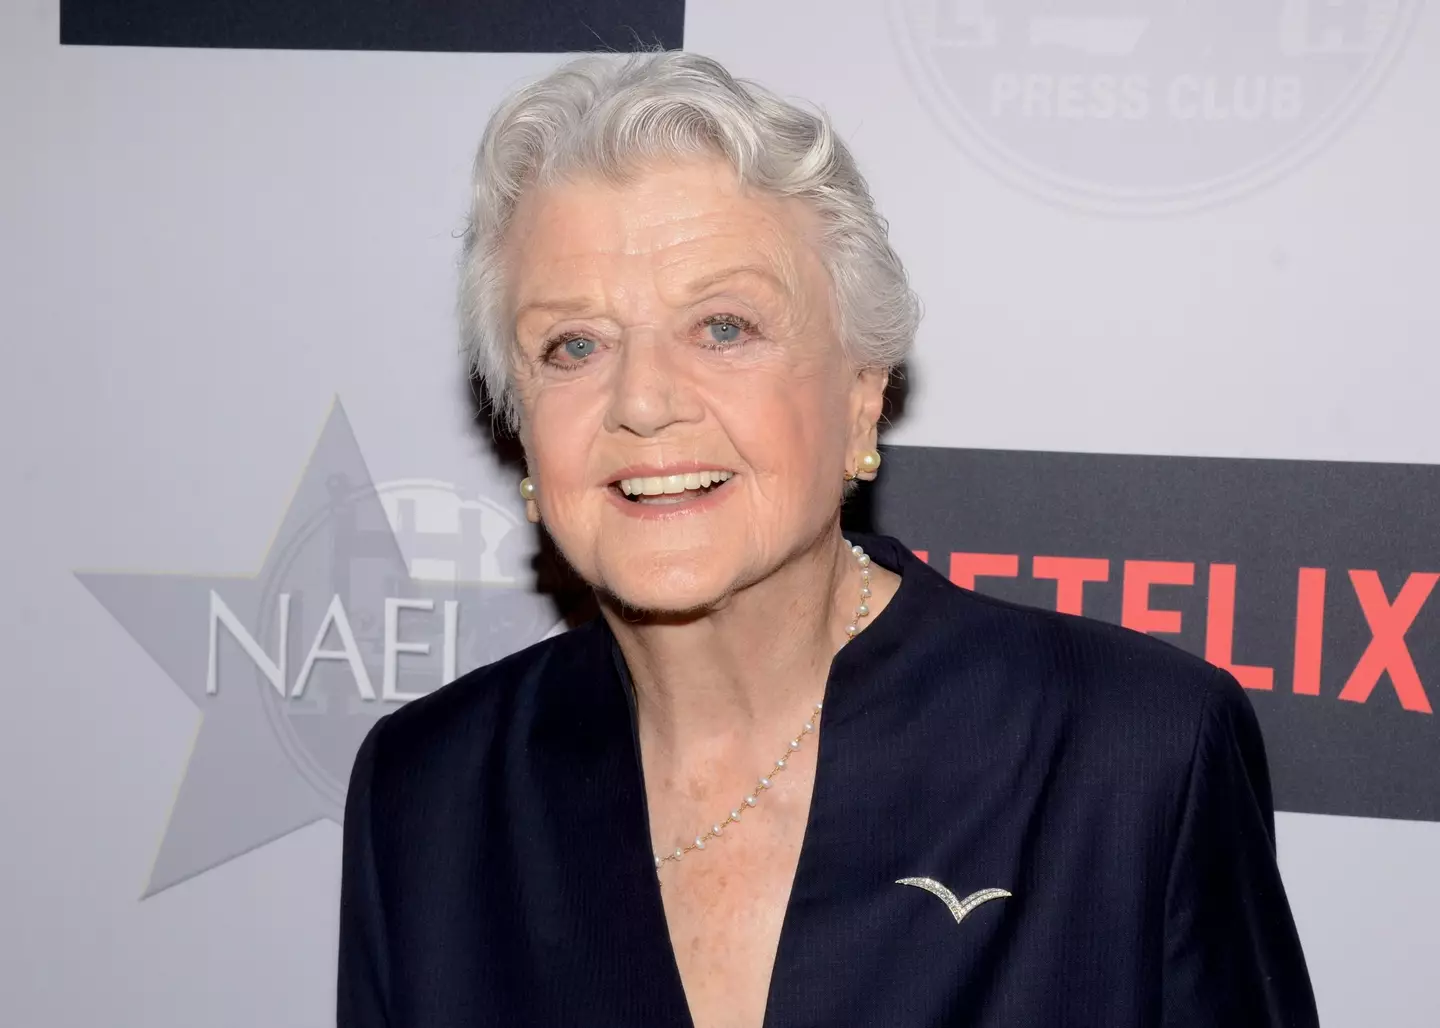 Angela Lansbury has passed away at the age of 96.